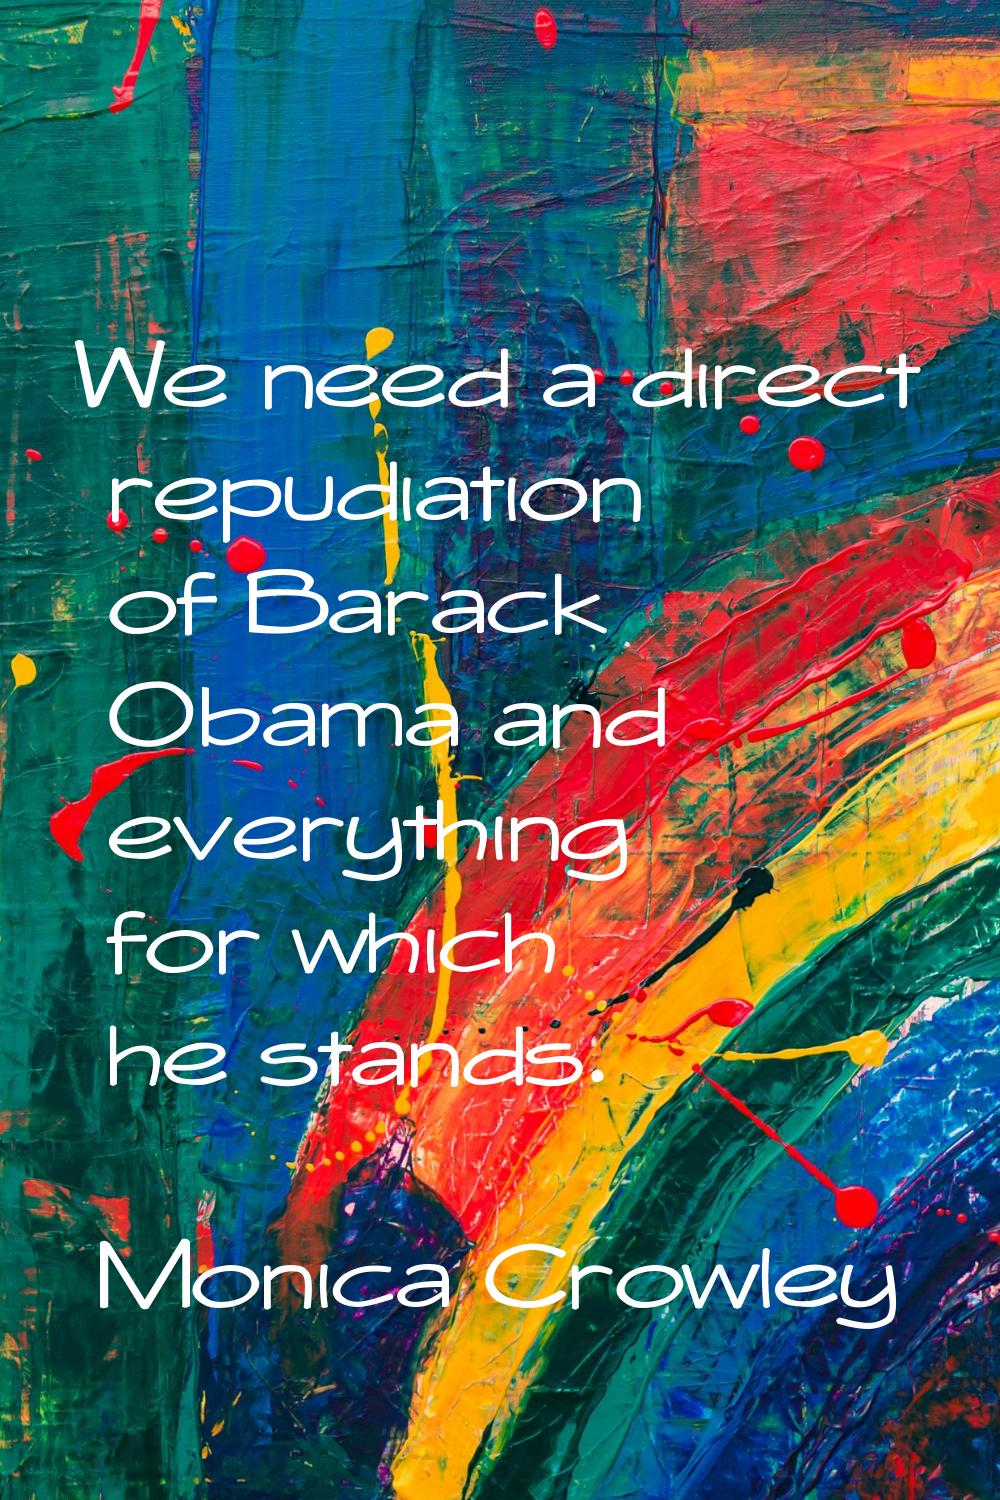 We need a direct repudiation of Barack Obama and everything for which he stands.